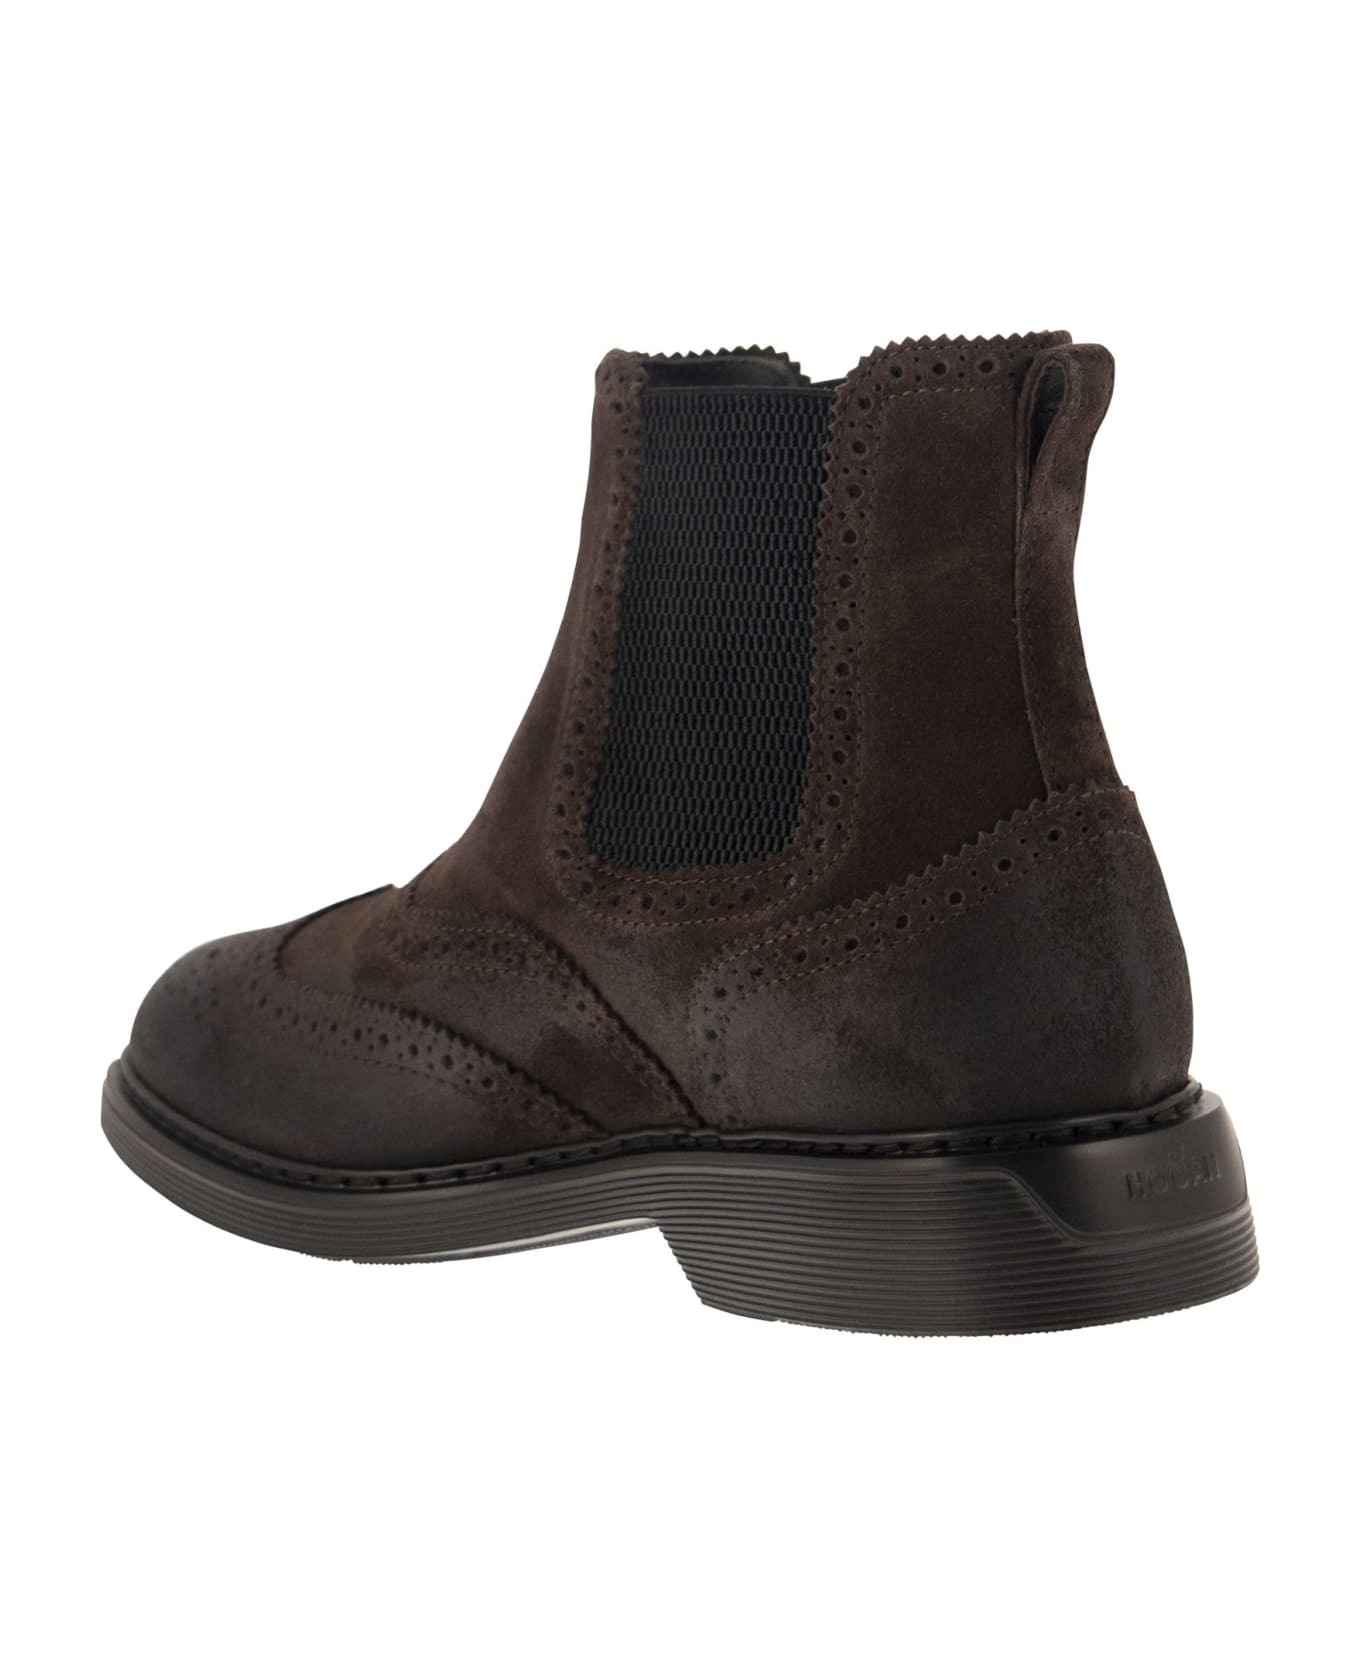 Hogan Chelsea Ankle Boots - Brown ブーツ